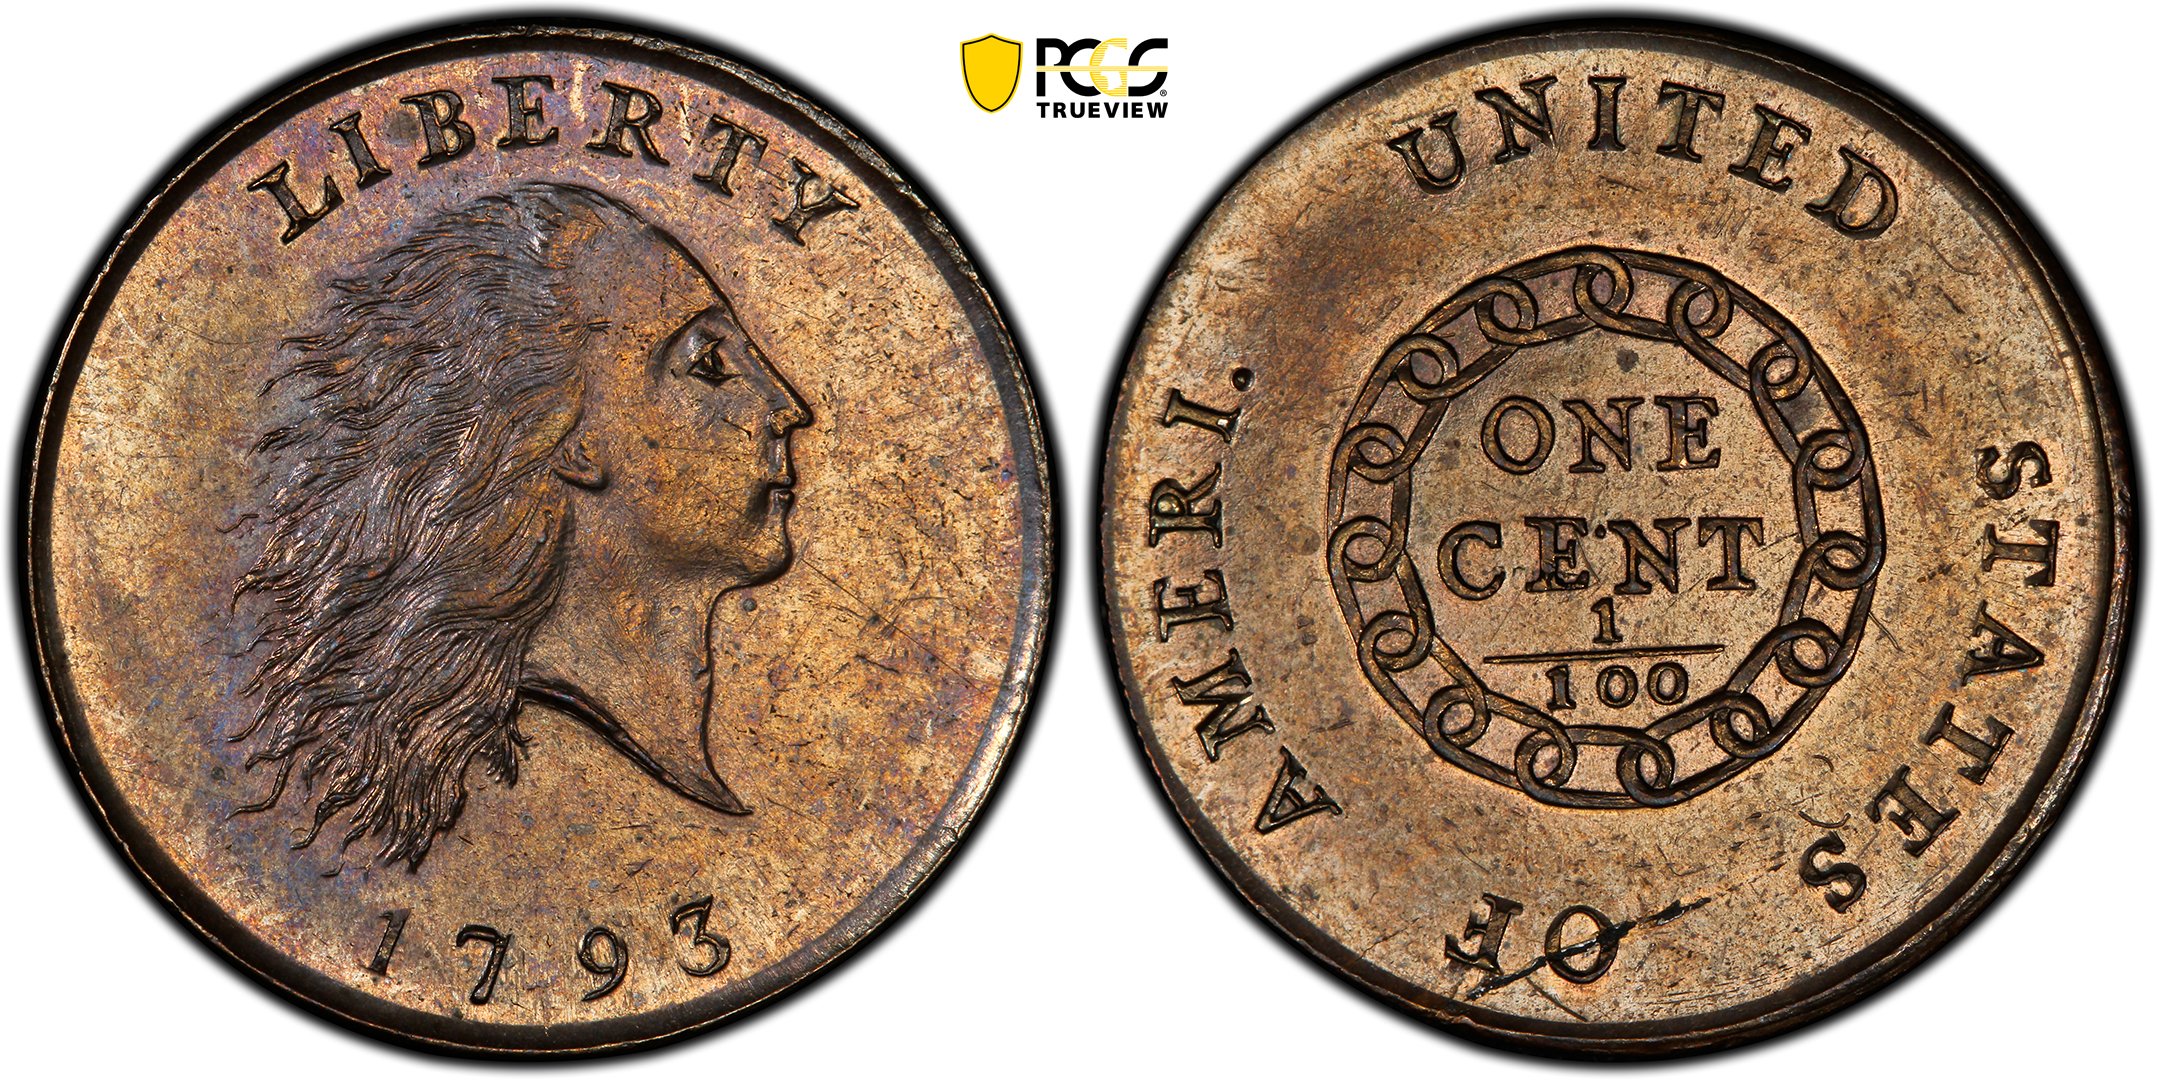 PCGS on X: The Coinage Act of April 2, 1792 established a mint and  regulated the coins of the United States. The first #coins delivered in  1793 were 11,178 copper cents. To